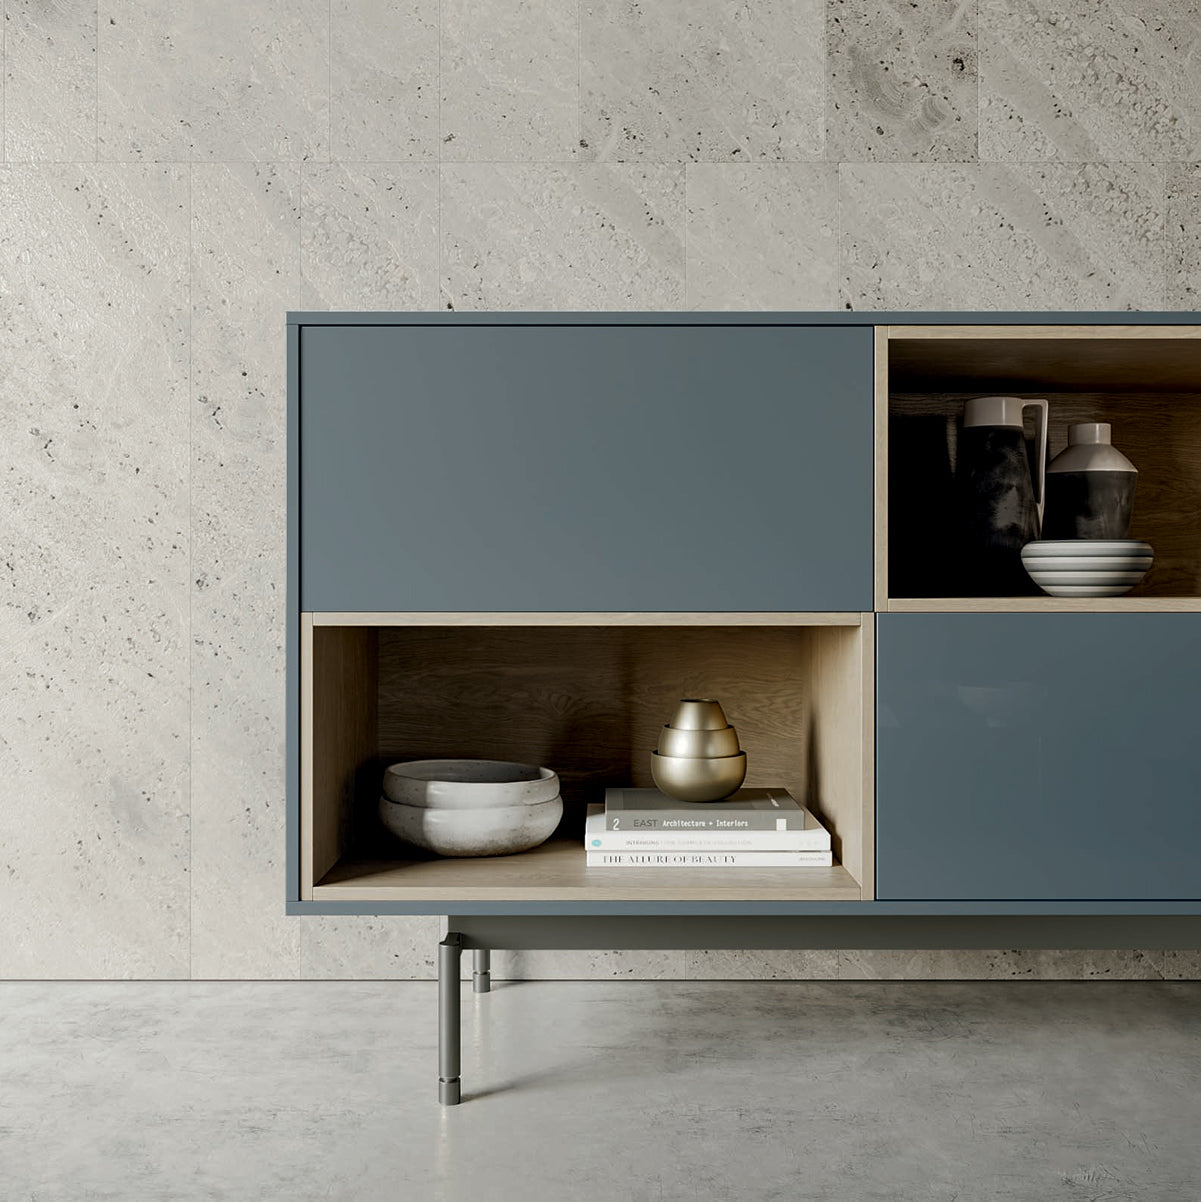 Code 5 sideboard by Dall'Agnese